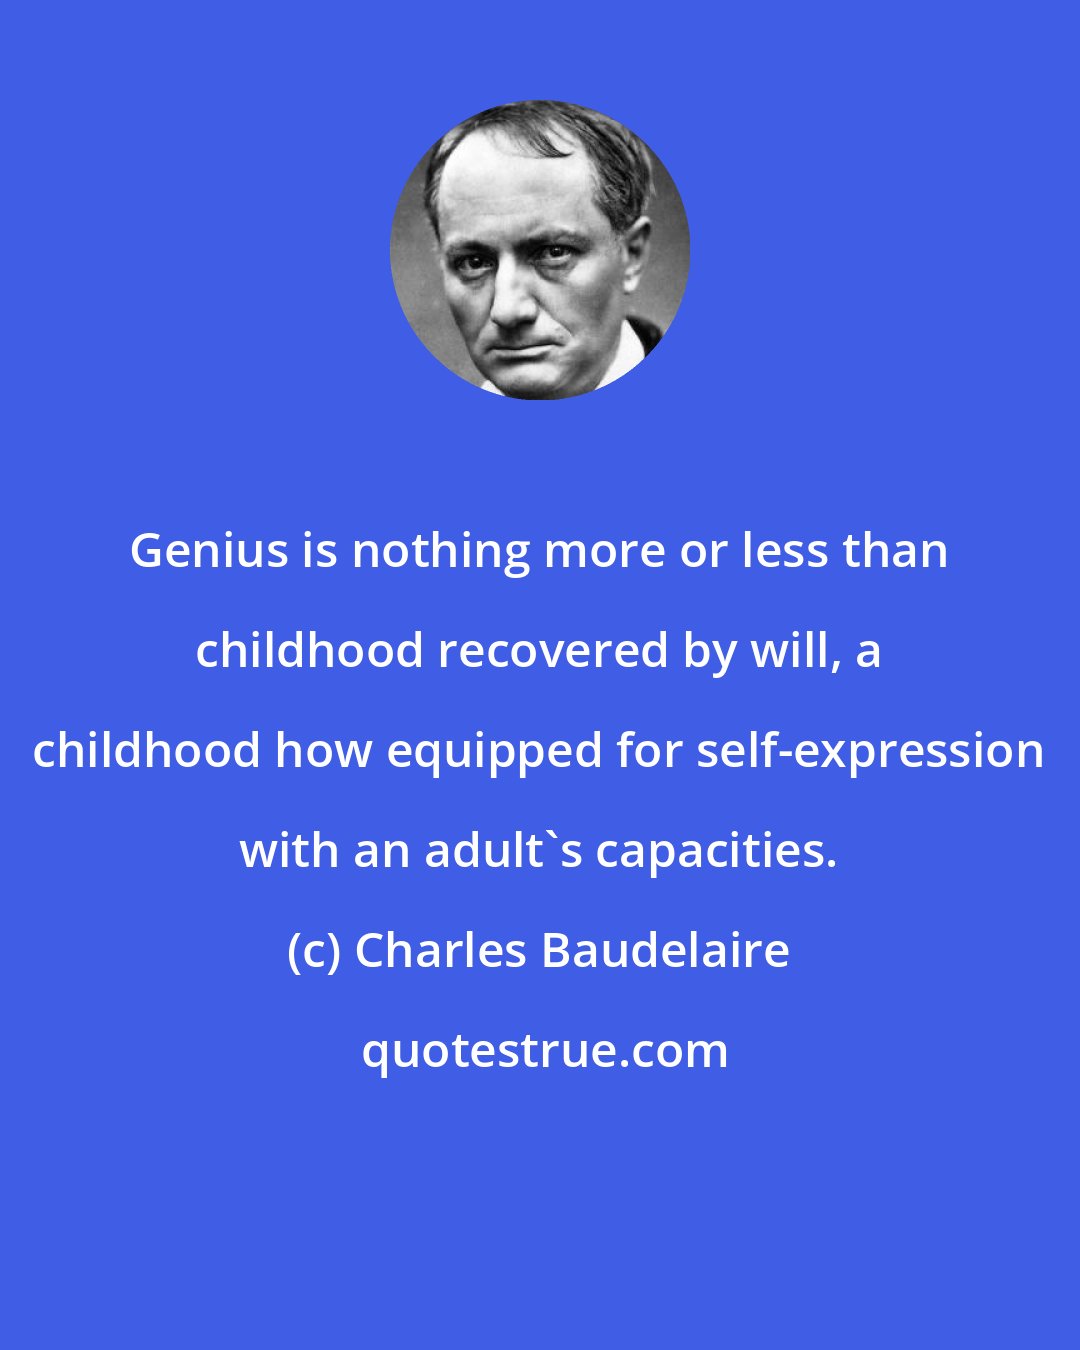 Charles Baudelaire: Genius is nothing more or less than childhood recovered by will, a childhood how equipped for self-expression with an adult's capacities.